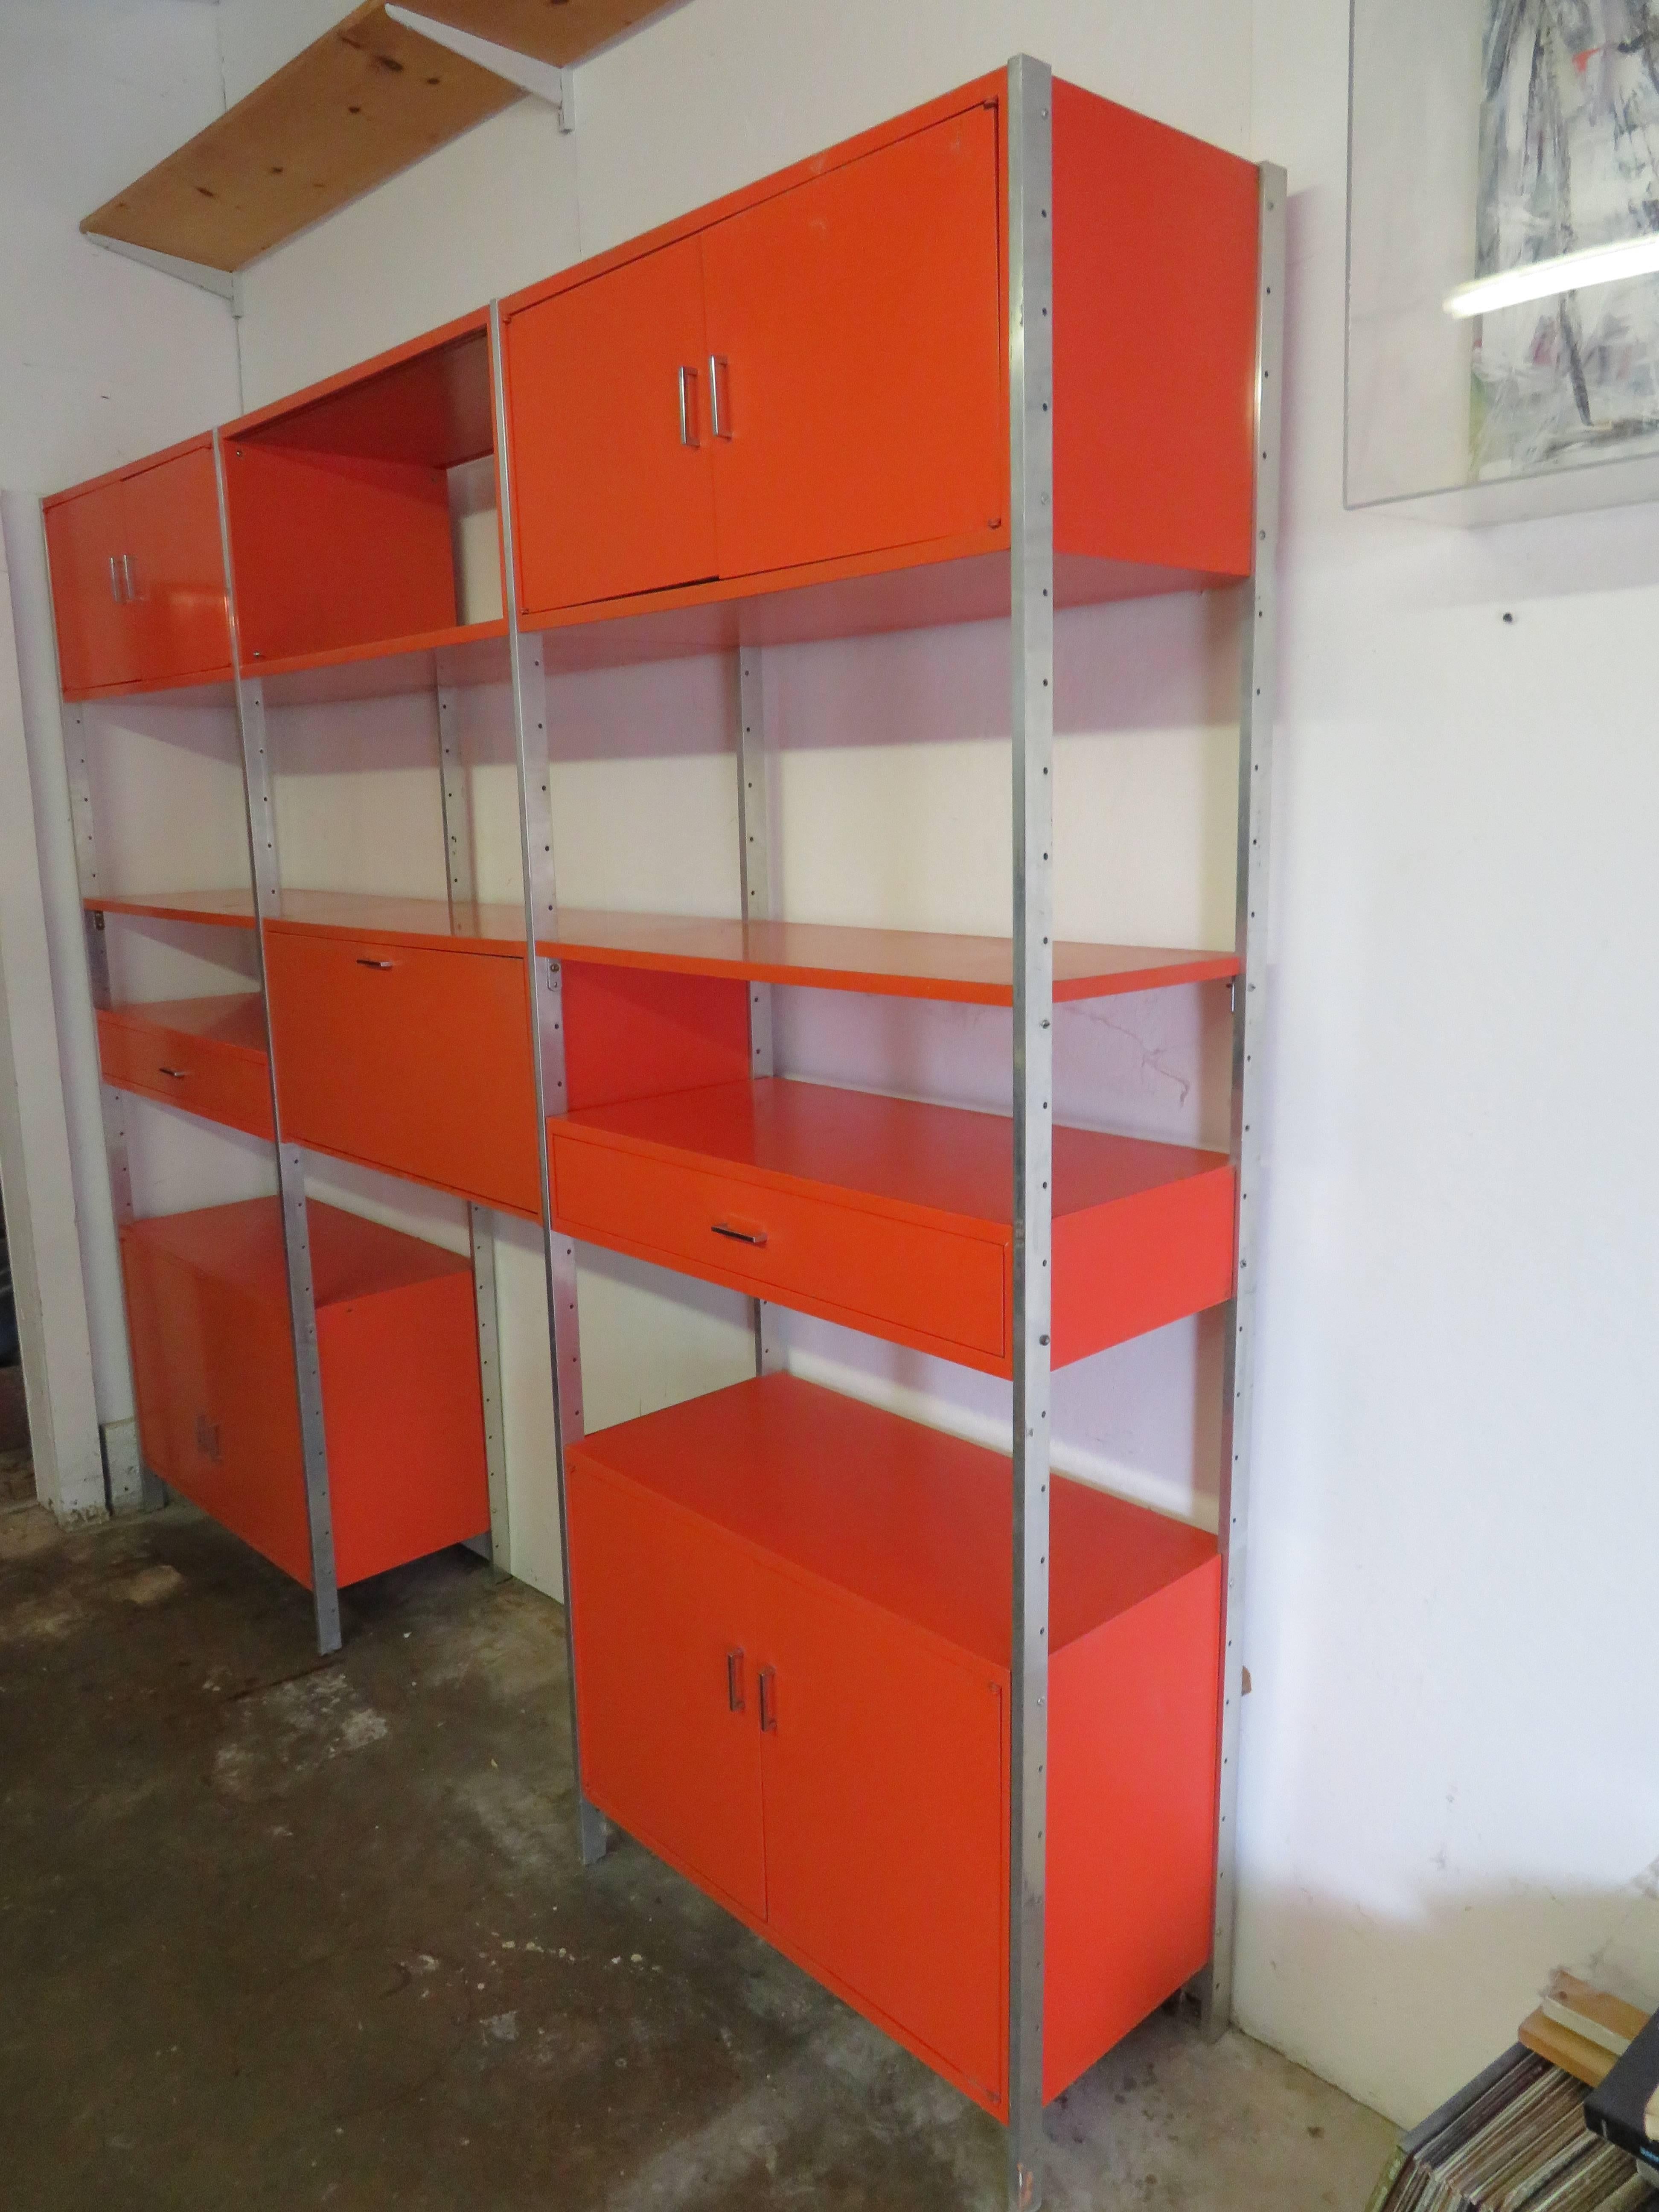 Unusual and rare orange lacquered three bay wall units by Founders. There are eight aluminum side rails, five large cabinets, two smaller drawer cabinets and two shelves. All retain their original orange lacquer in nice condition with light wear to